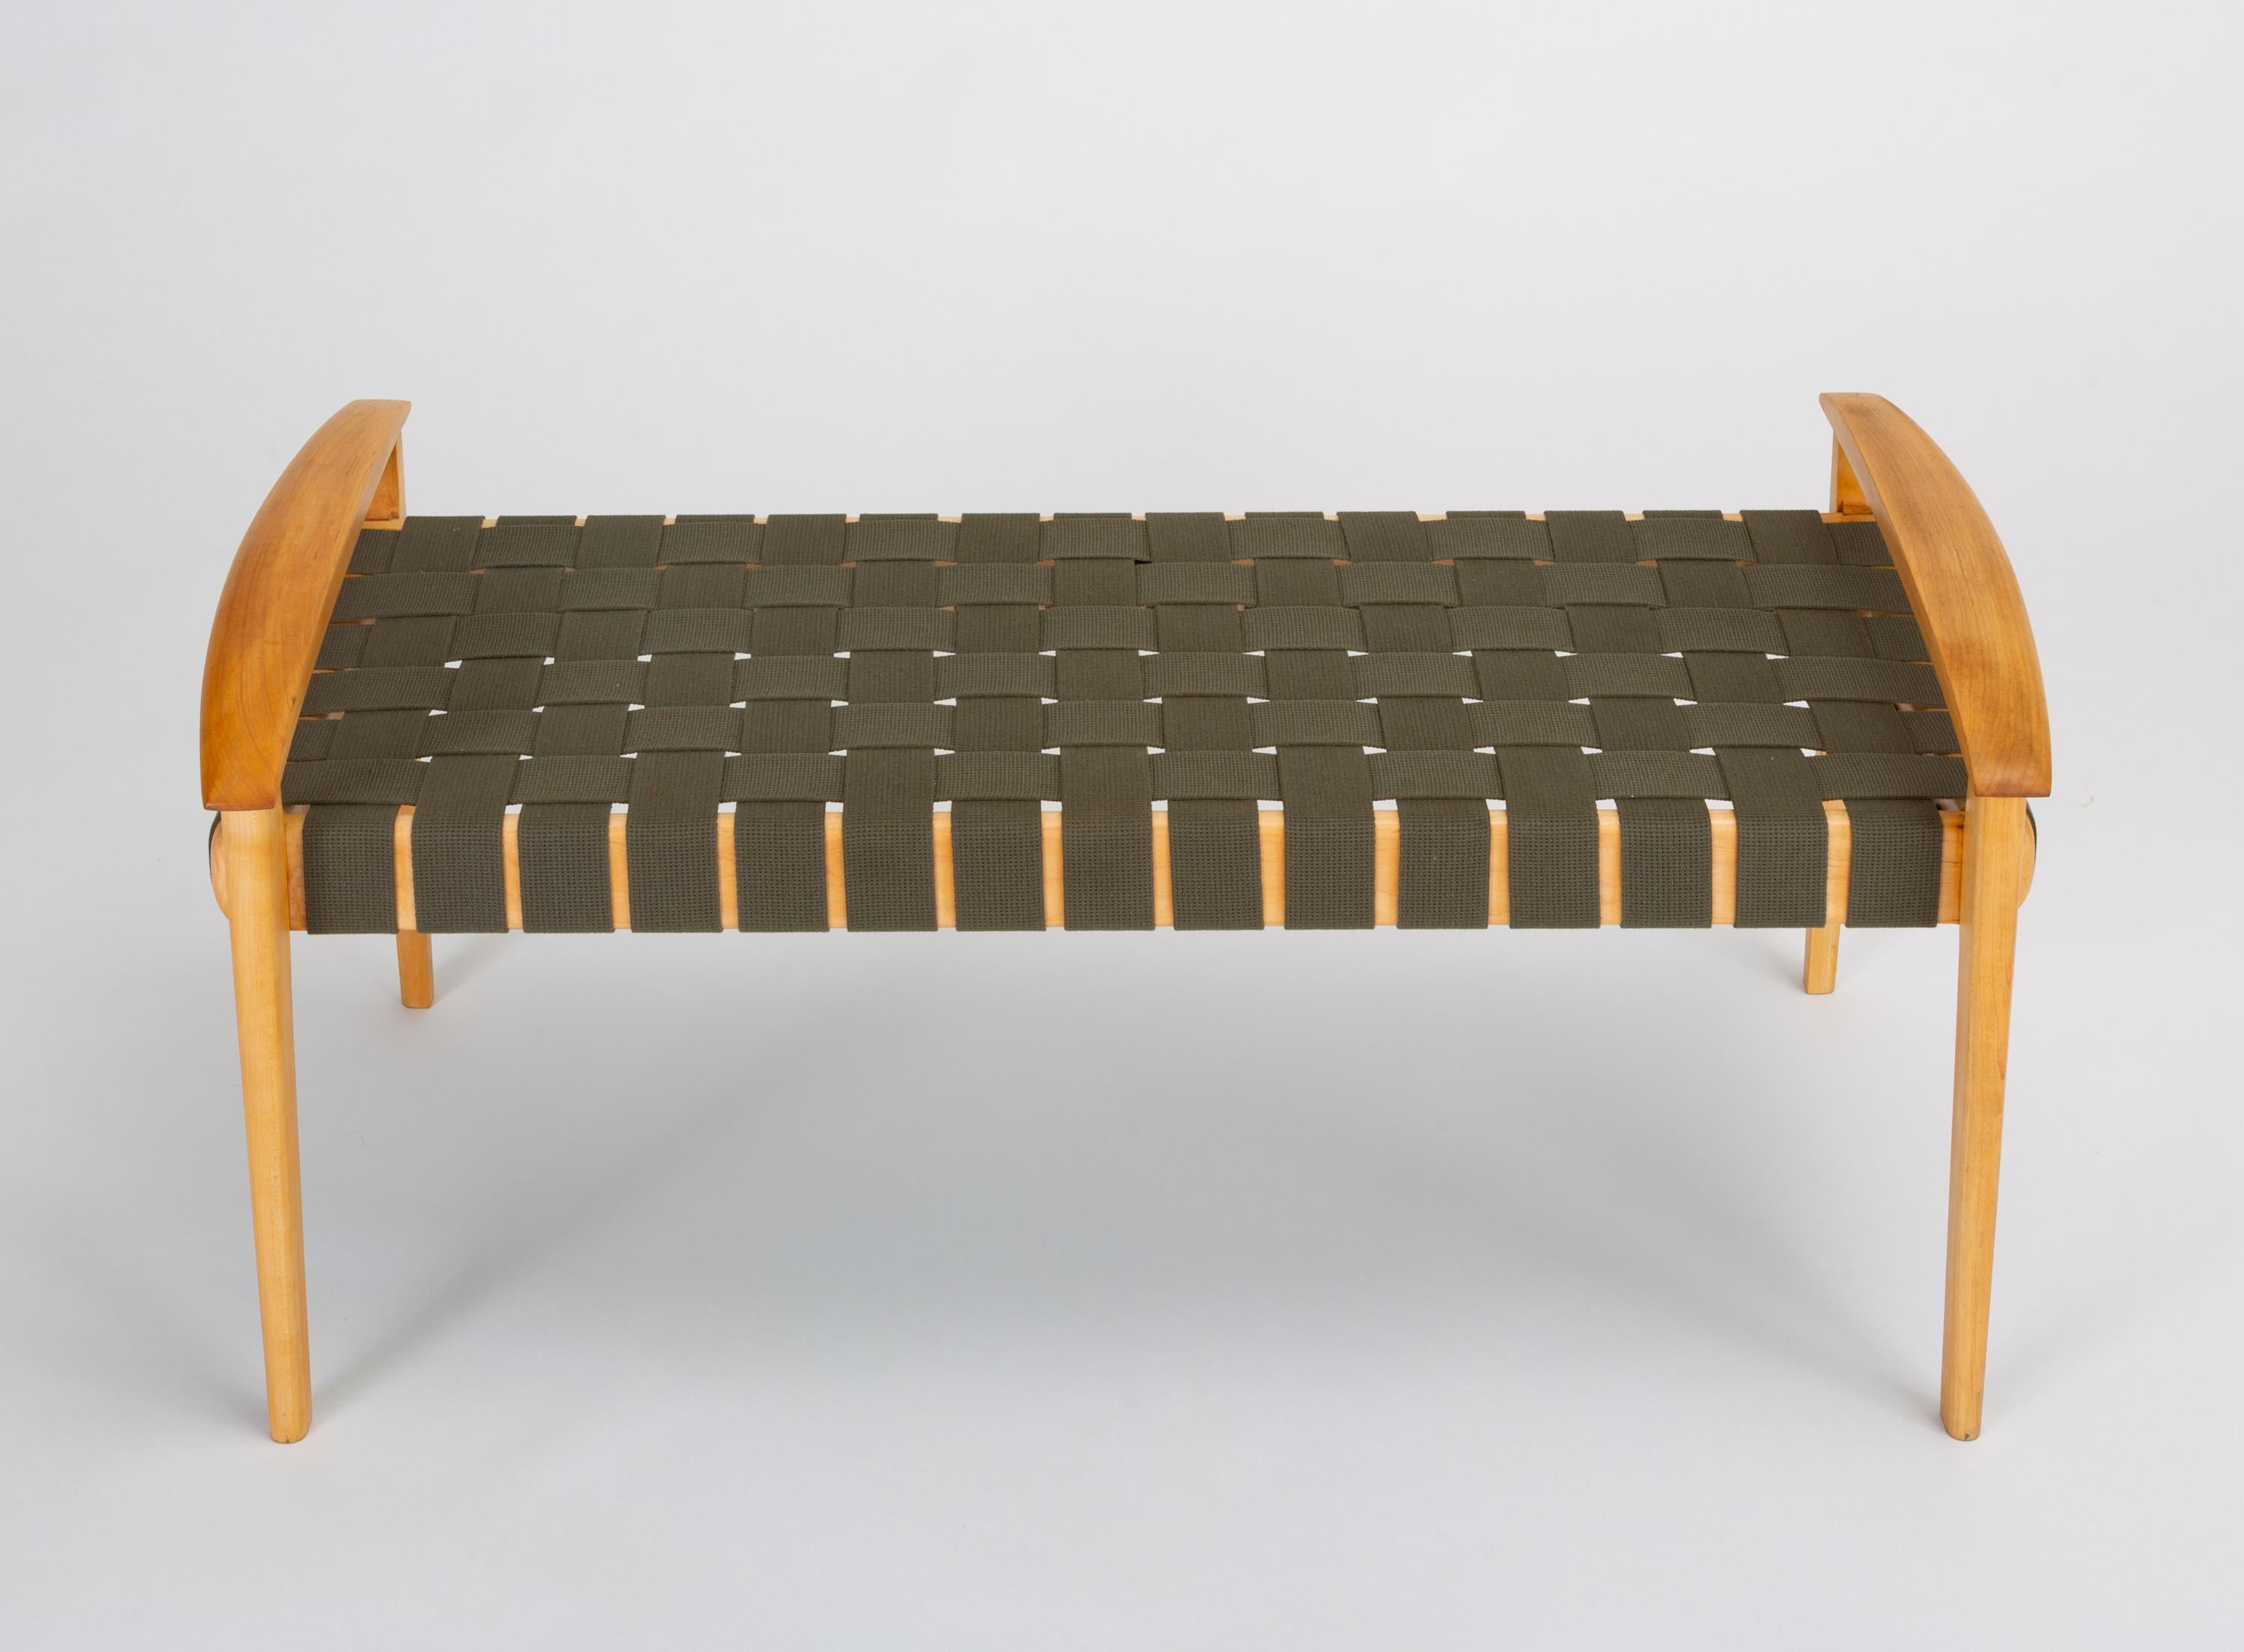 Scandinavian Modern American-Made Maple Bench with Woven Seat by Tom Ghilarducci